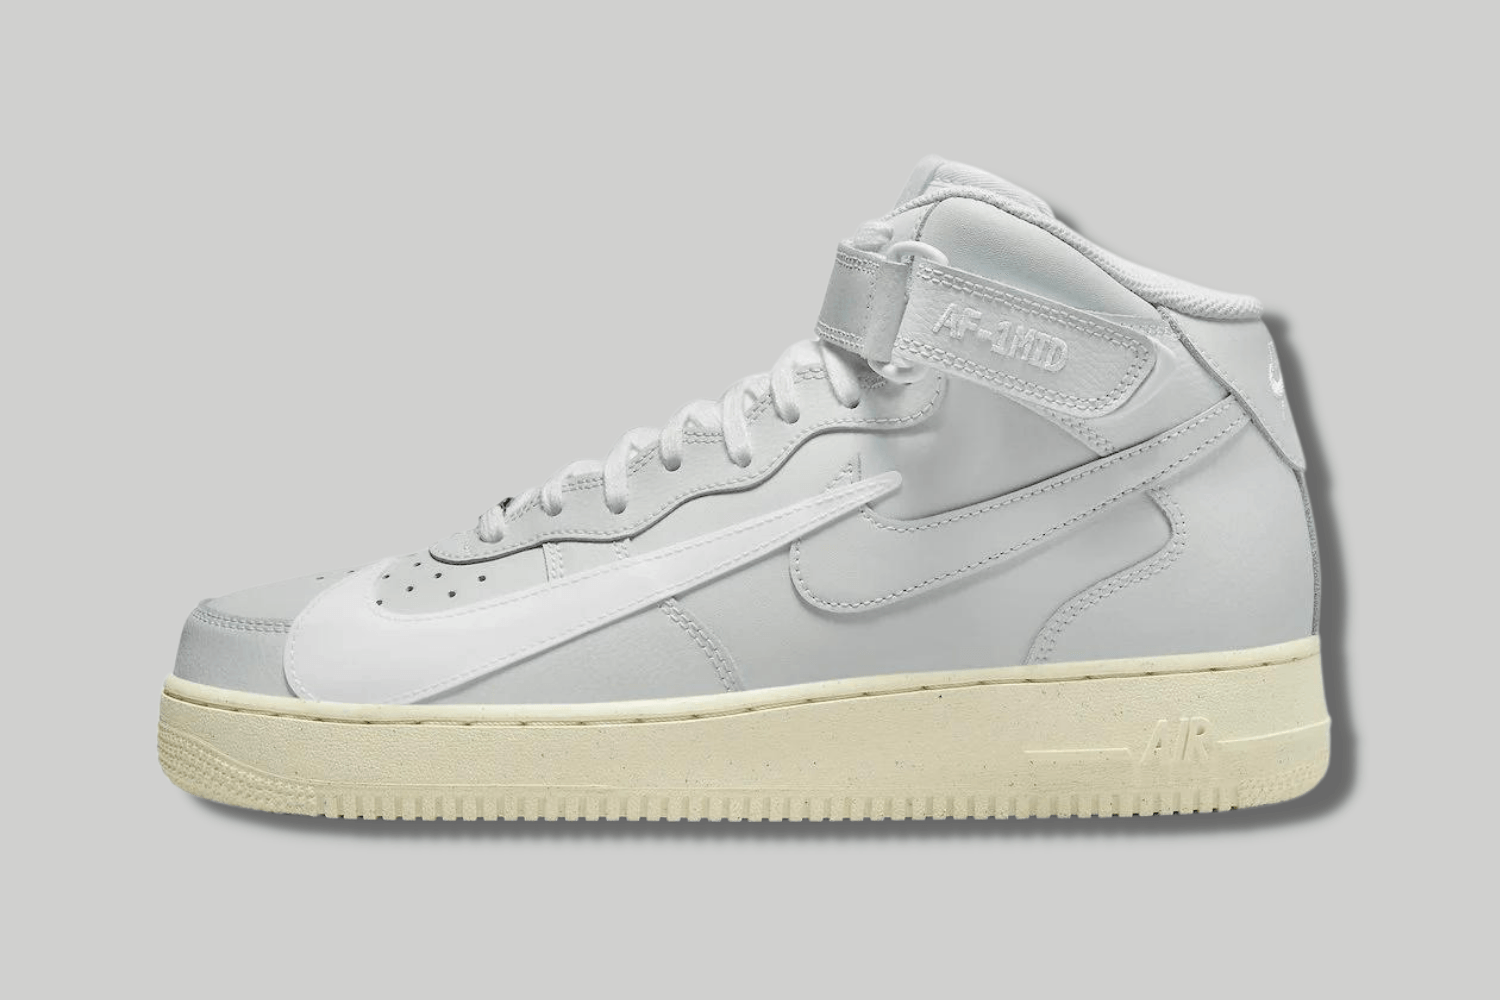 The Nike Air Force 1 Mid 'Copy Paste' is coming soon